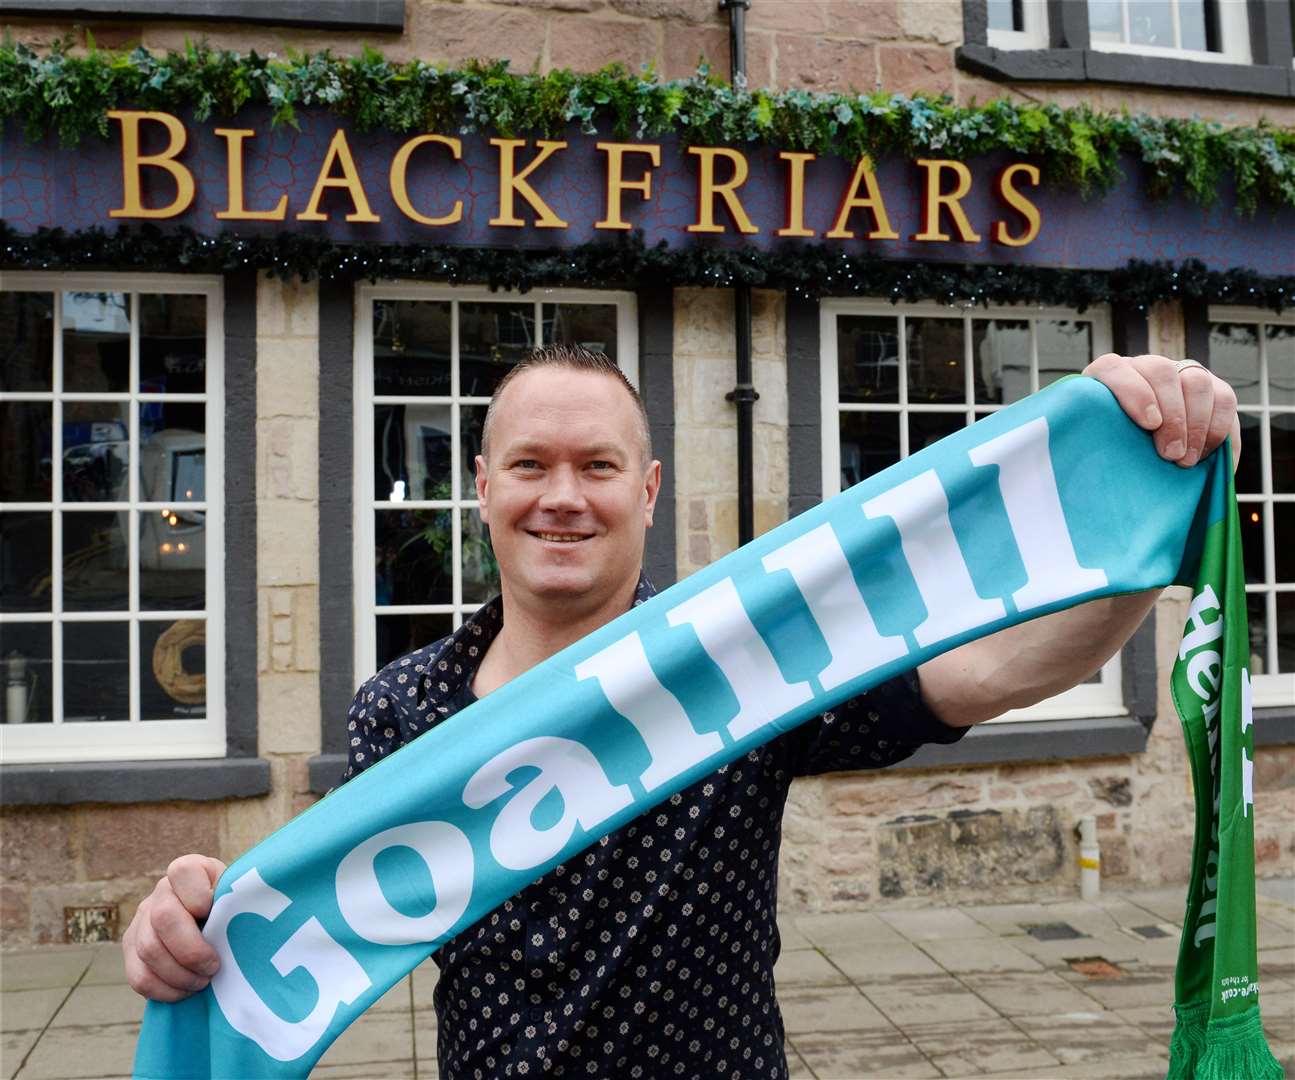 Billy McKechnie is ready to welcome fans to Blackfriars during Euro 2020. Picture: Gary Anthony